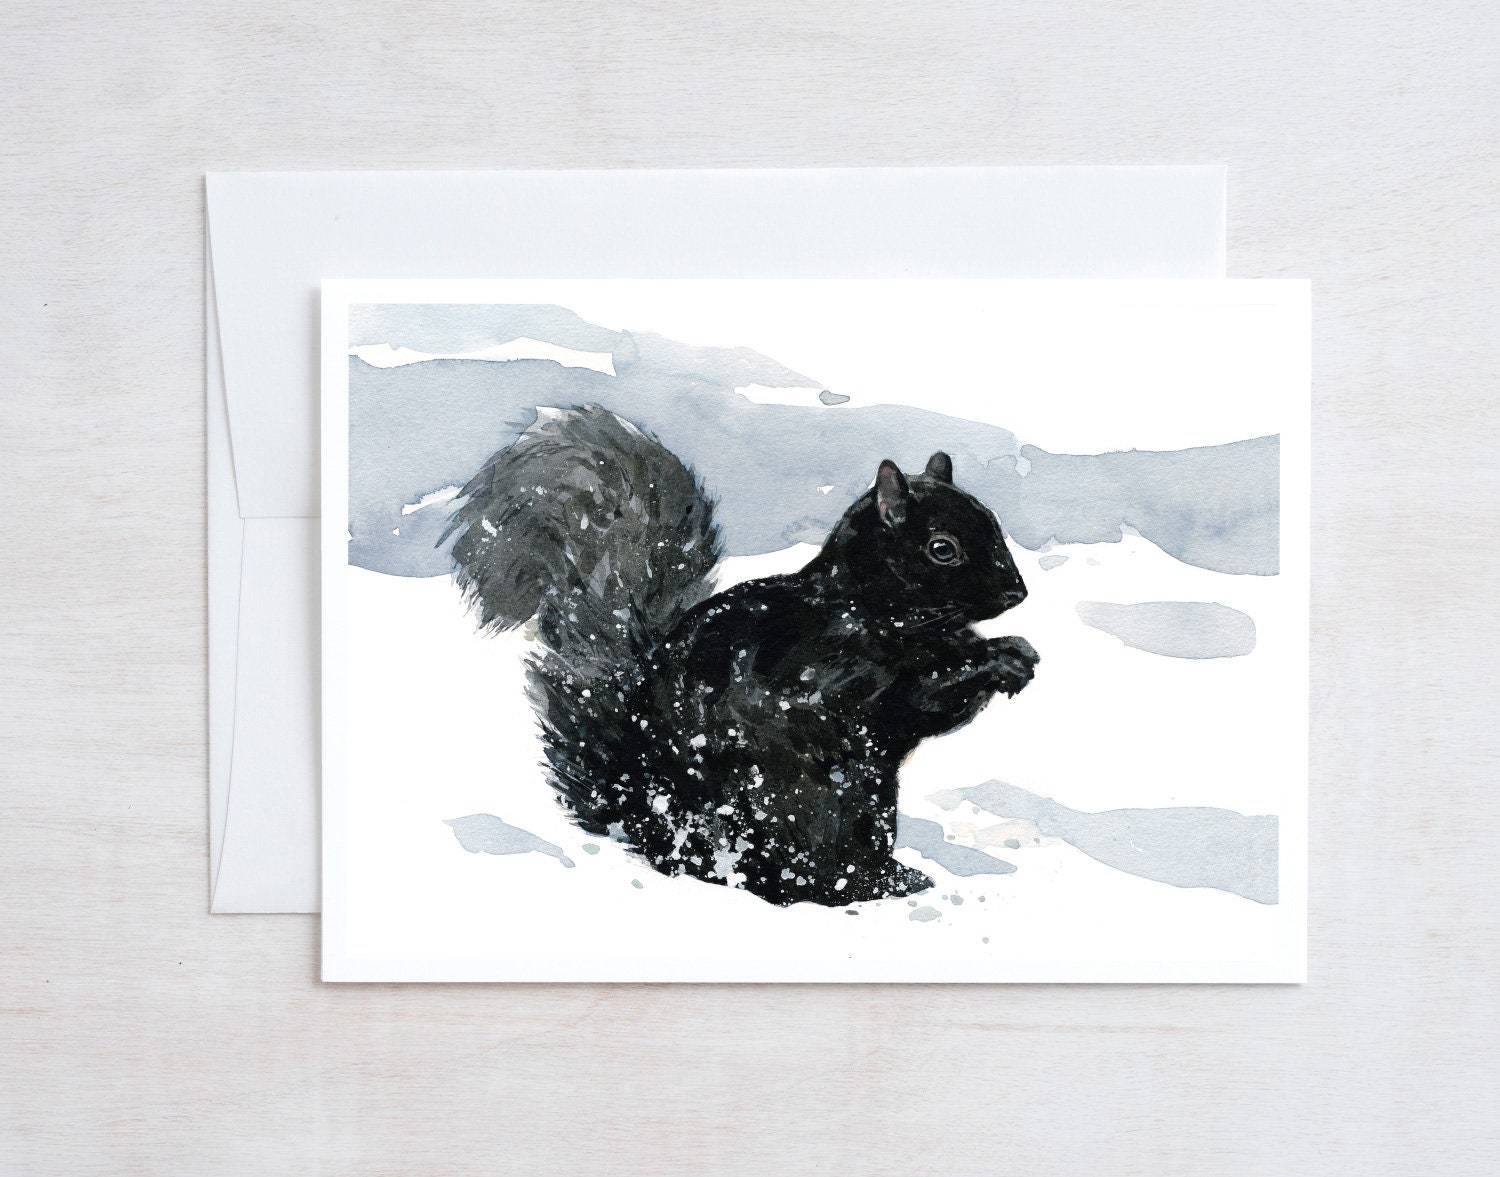 Black Squirrel Winter Card, Christmas Holiday Wildlife in Snow Note Card